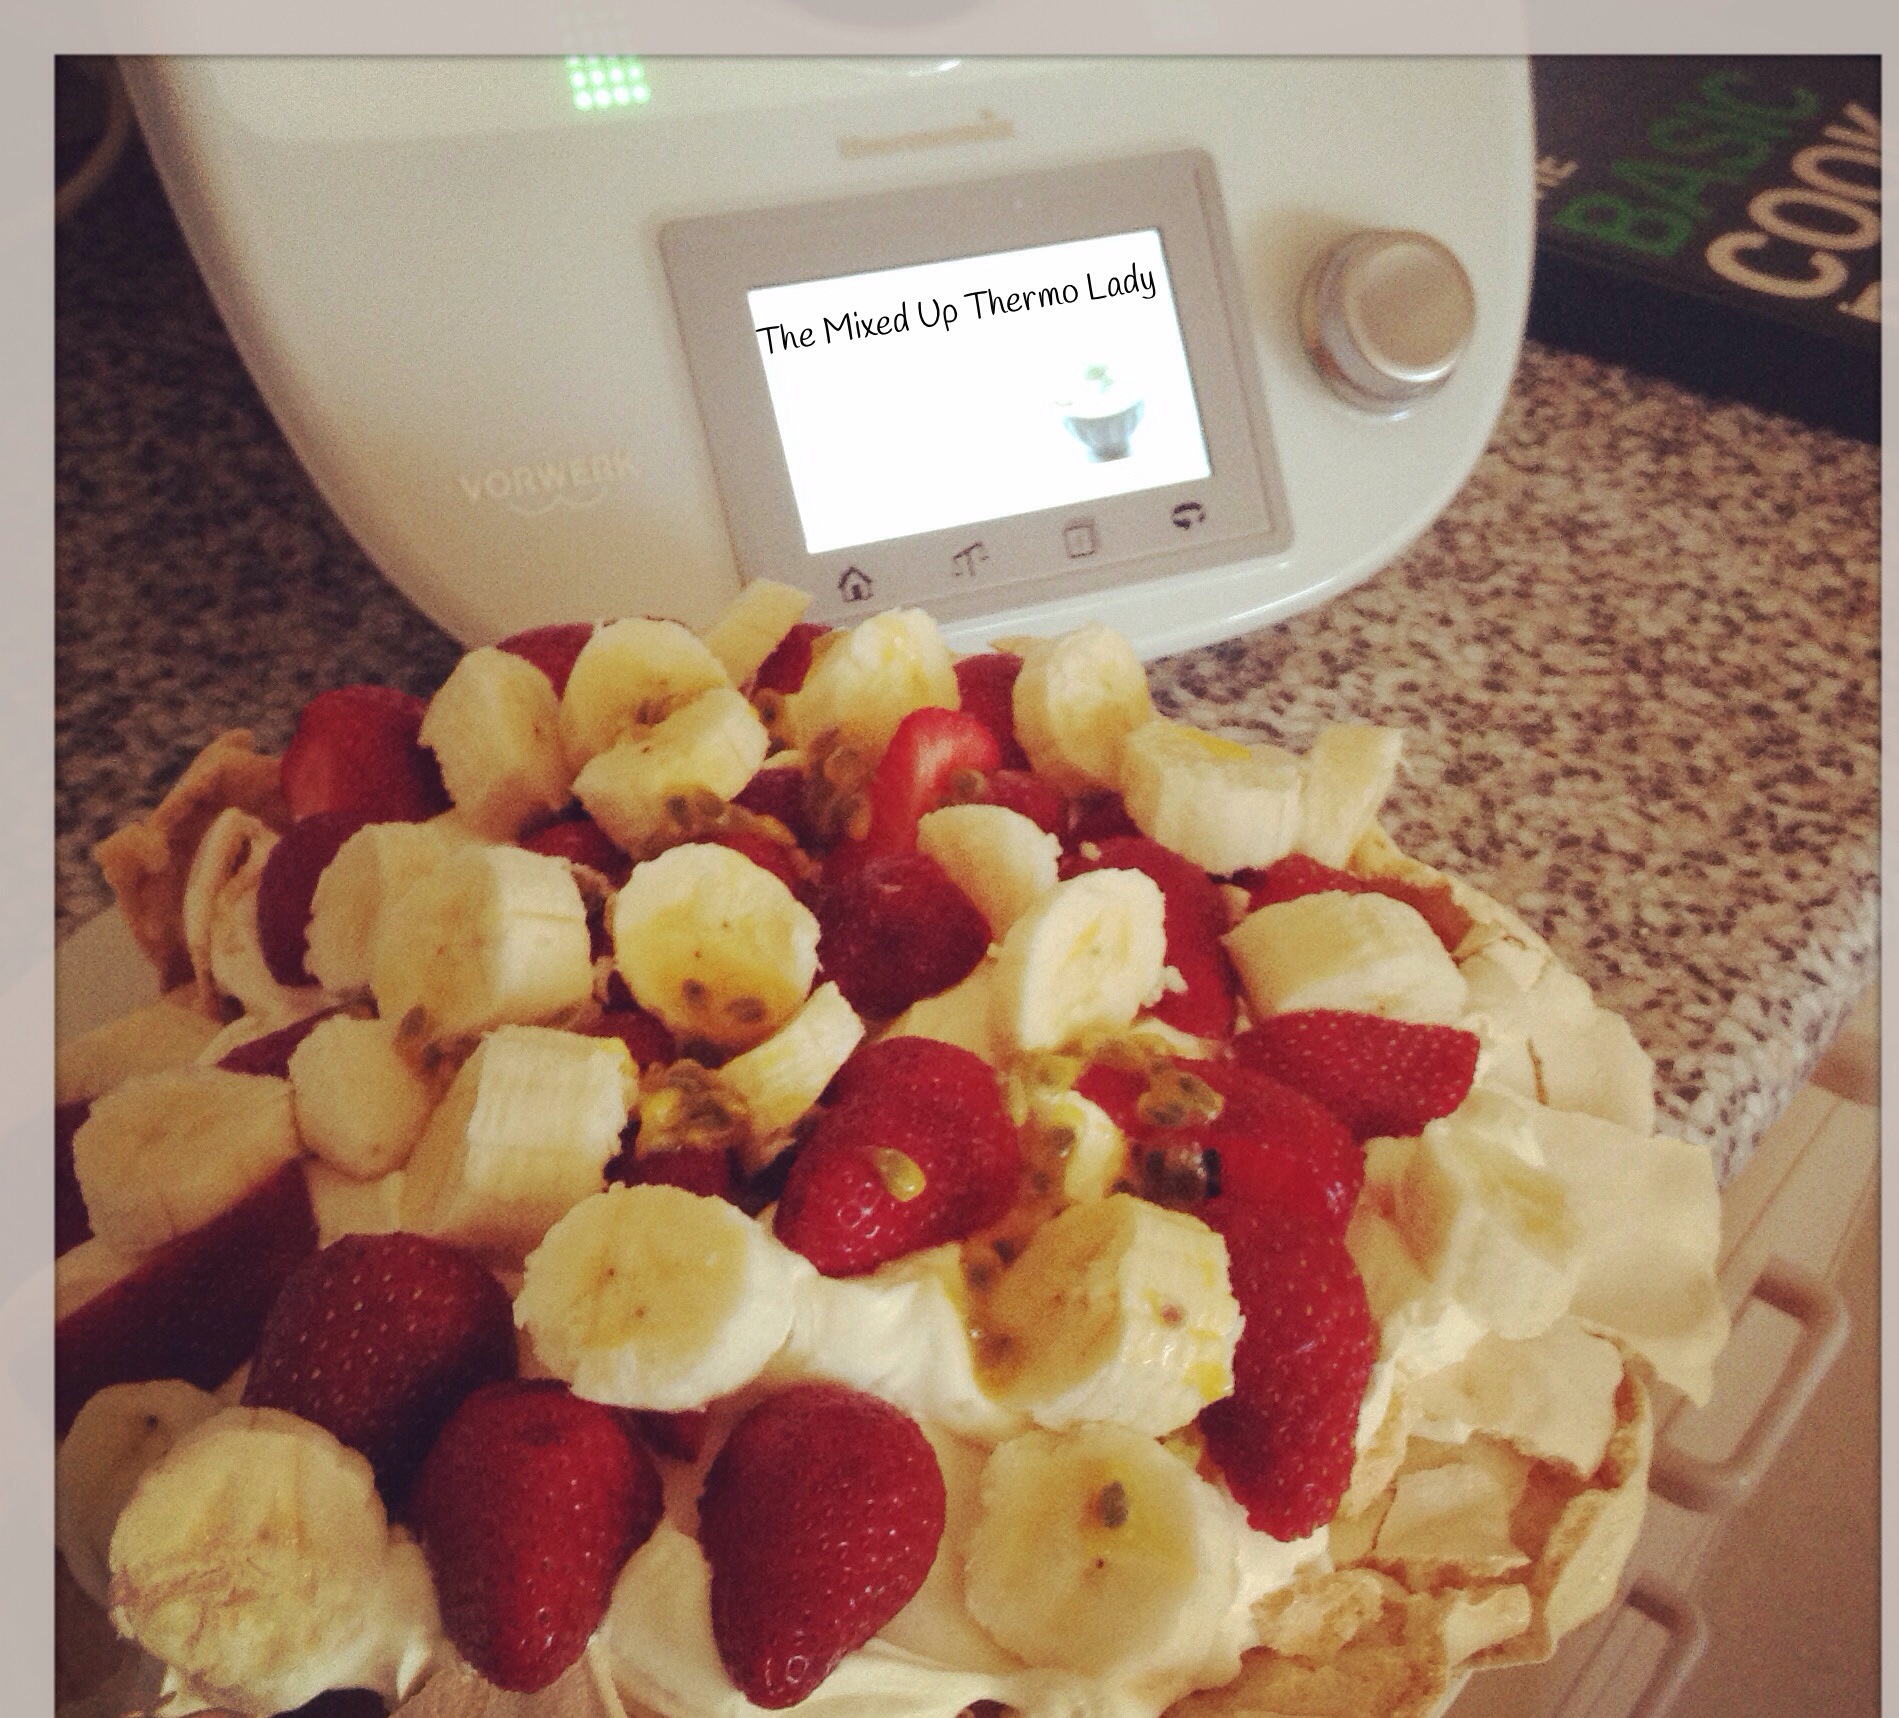 pavlova thermomix consultant dubbo cunnamulla guided cooking model 5 tm31